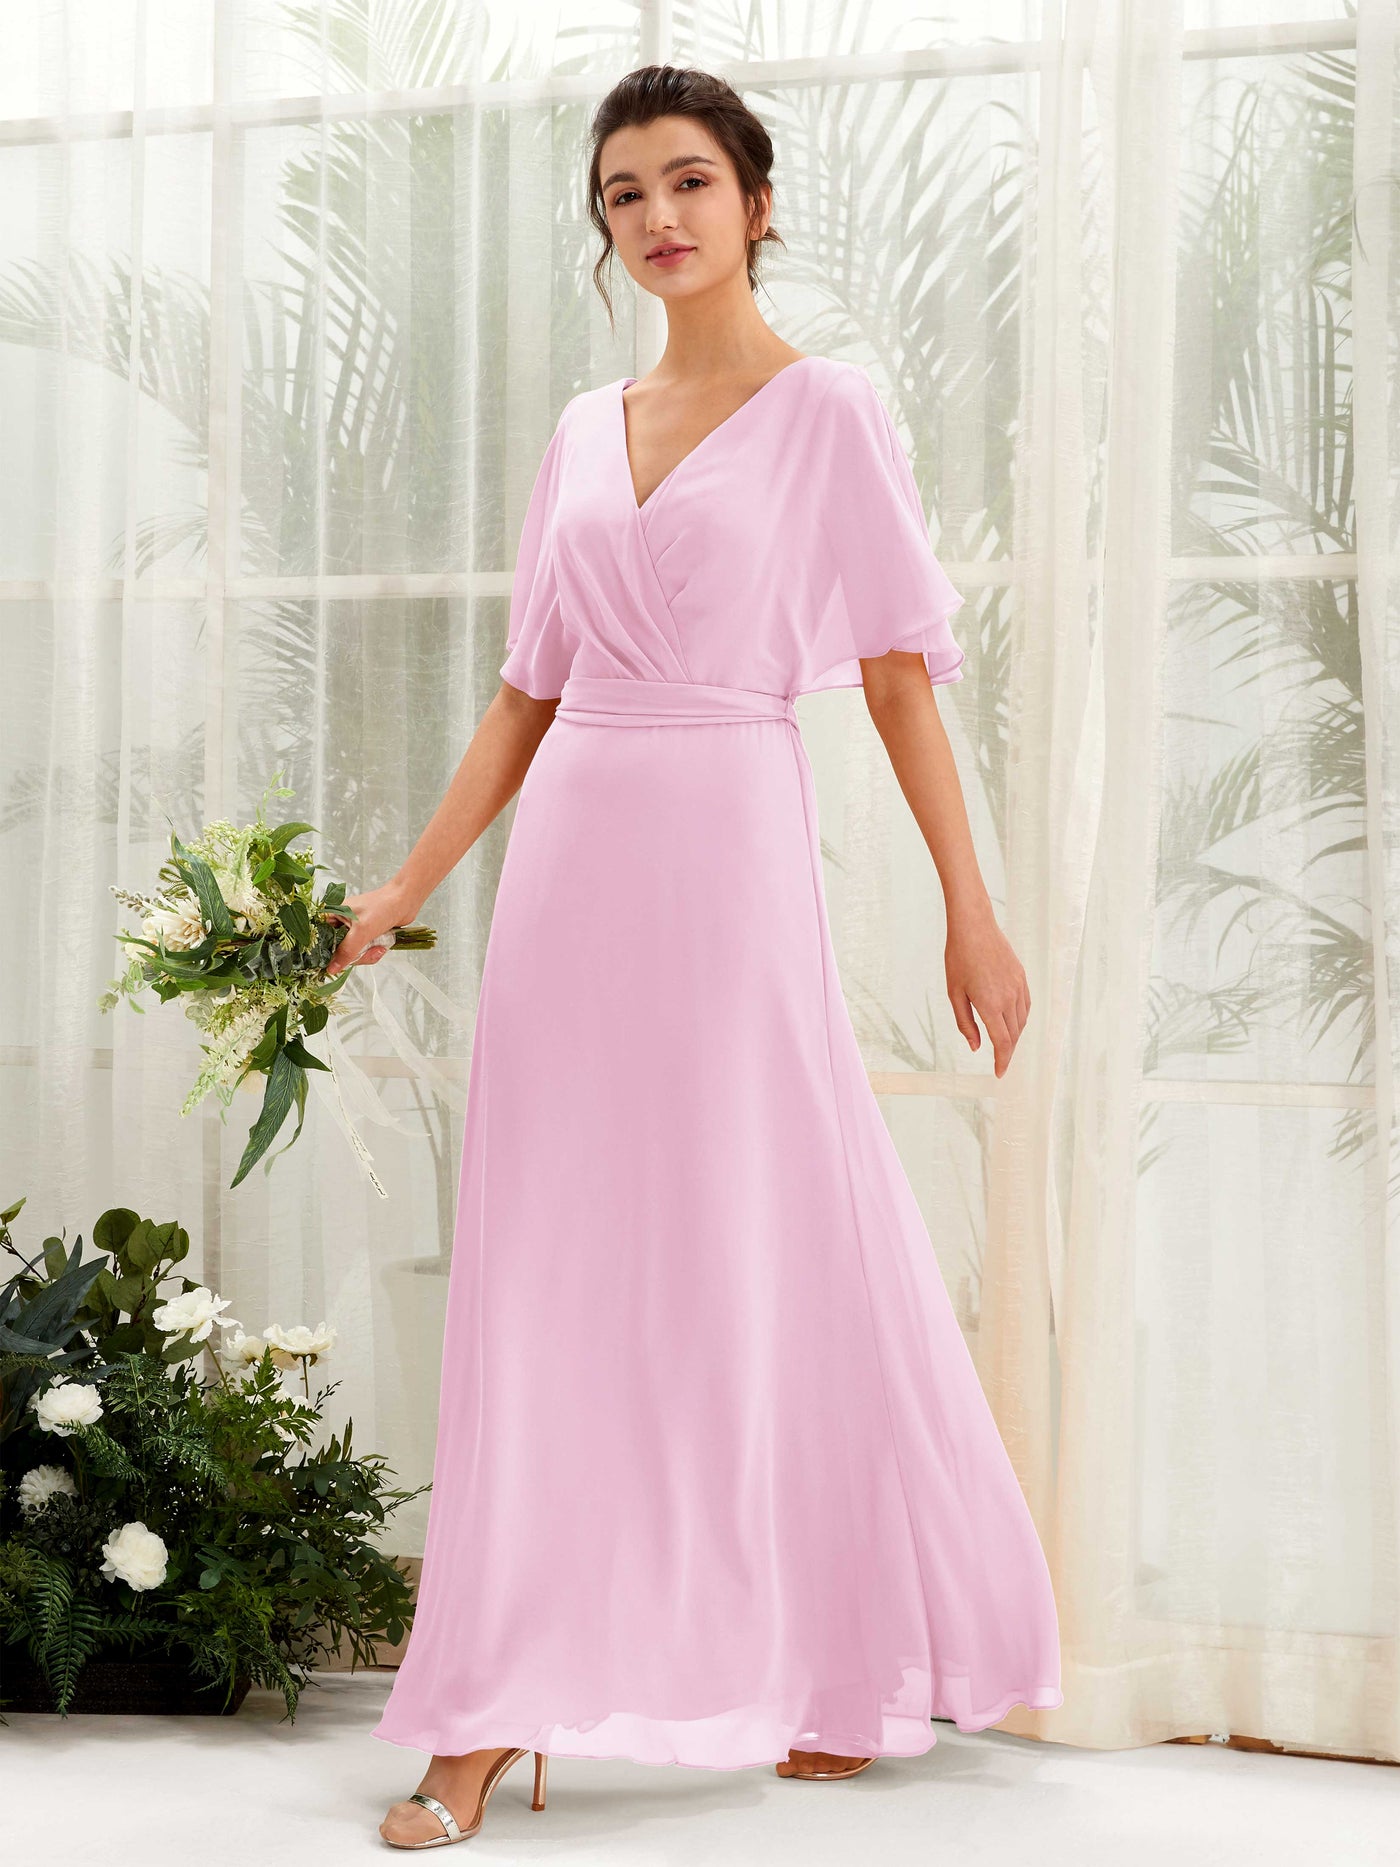 Candy Pink Bridesmaid Dresses Bridesmaid Dress A-line Chiffon V-neck Full Length Short Sleeves Wedding Party Dress (81222439)#color_candy-pink